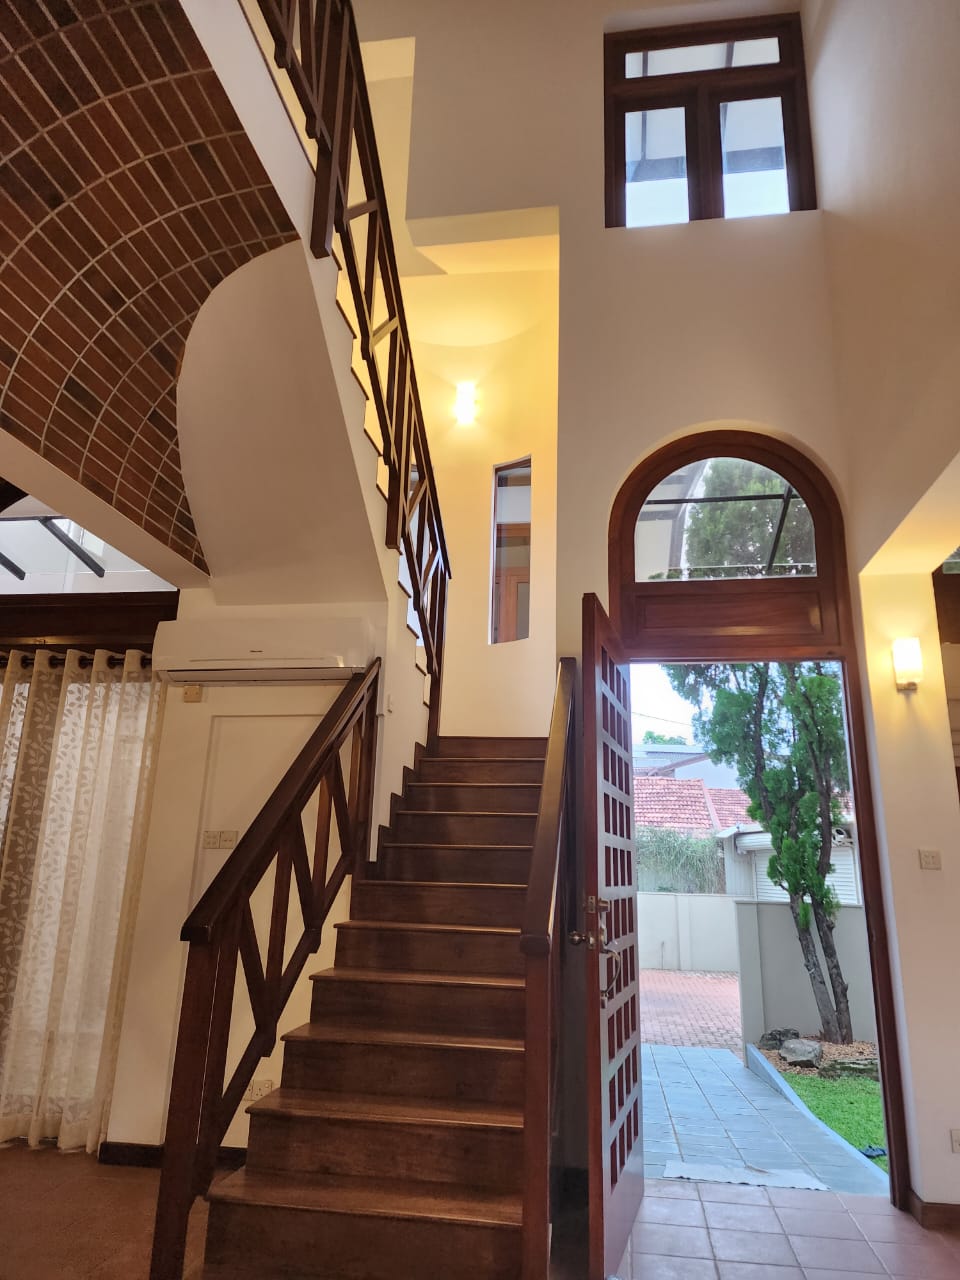 Luxury House with Pool for Rent Nawala - 6 Bedrooms & 6 Bathrooms - 800,000 LKR per Month